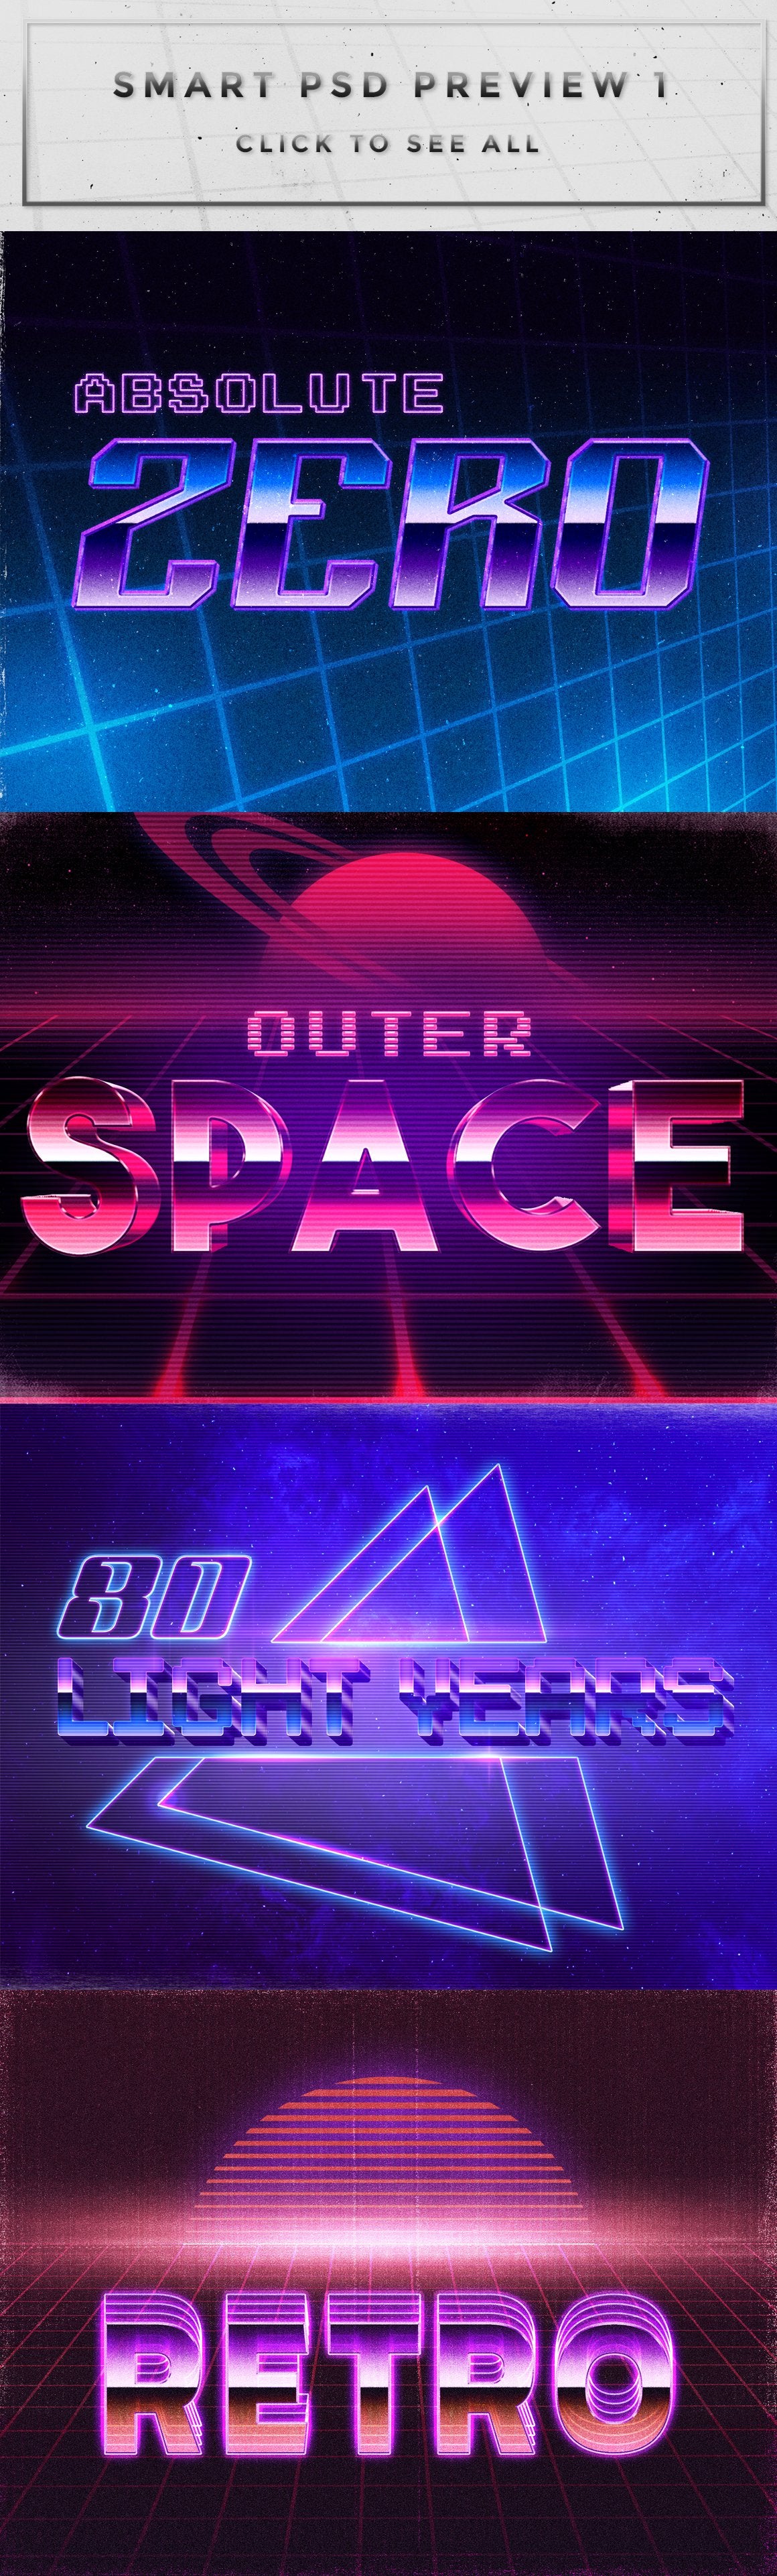 80's Inspired Photoshop Text Effects